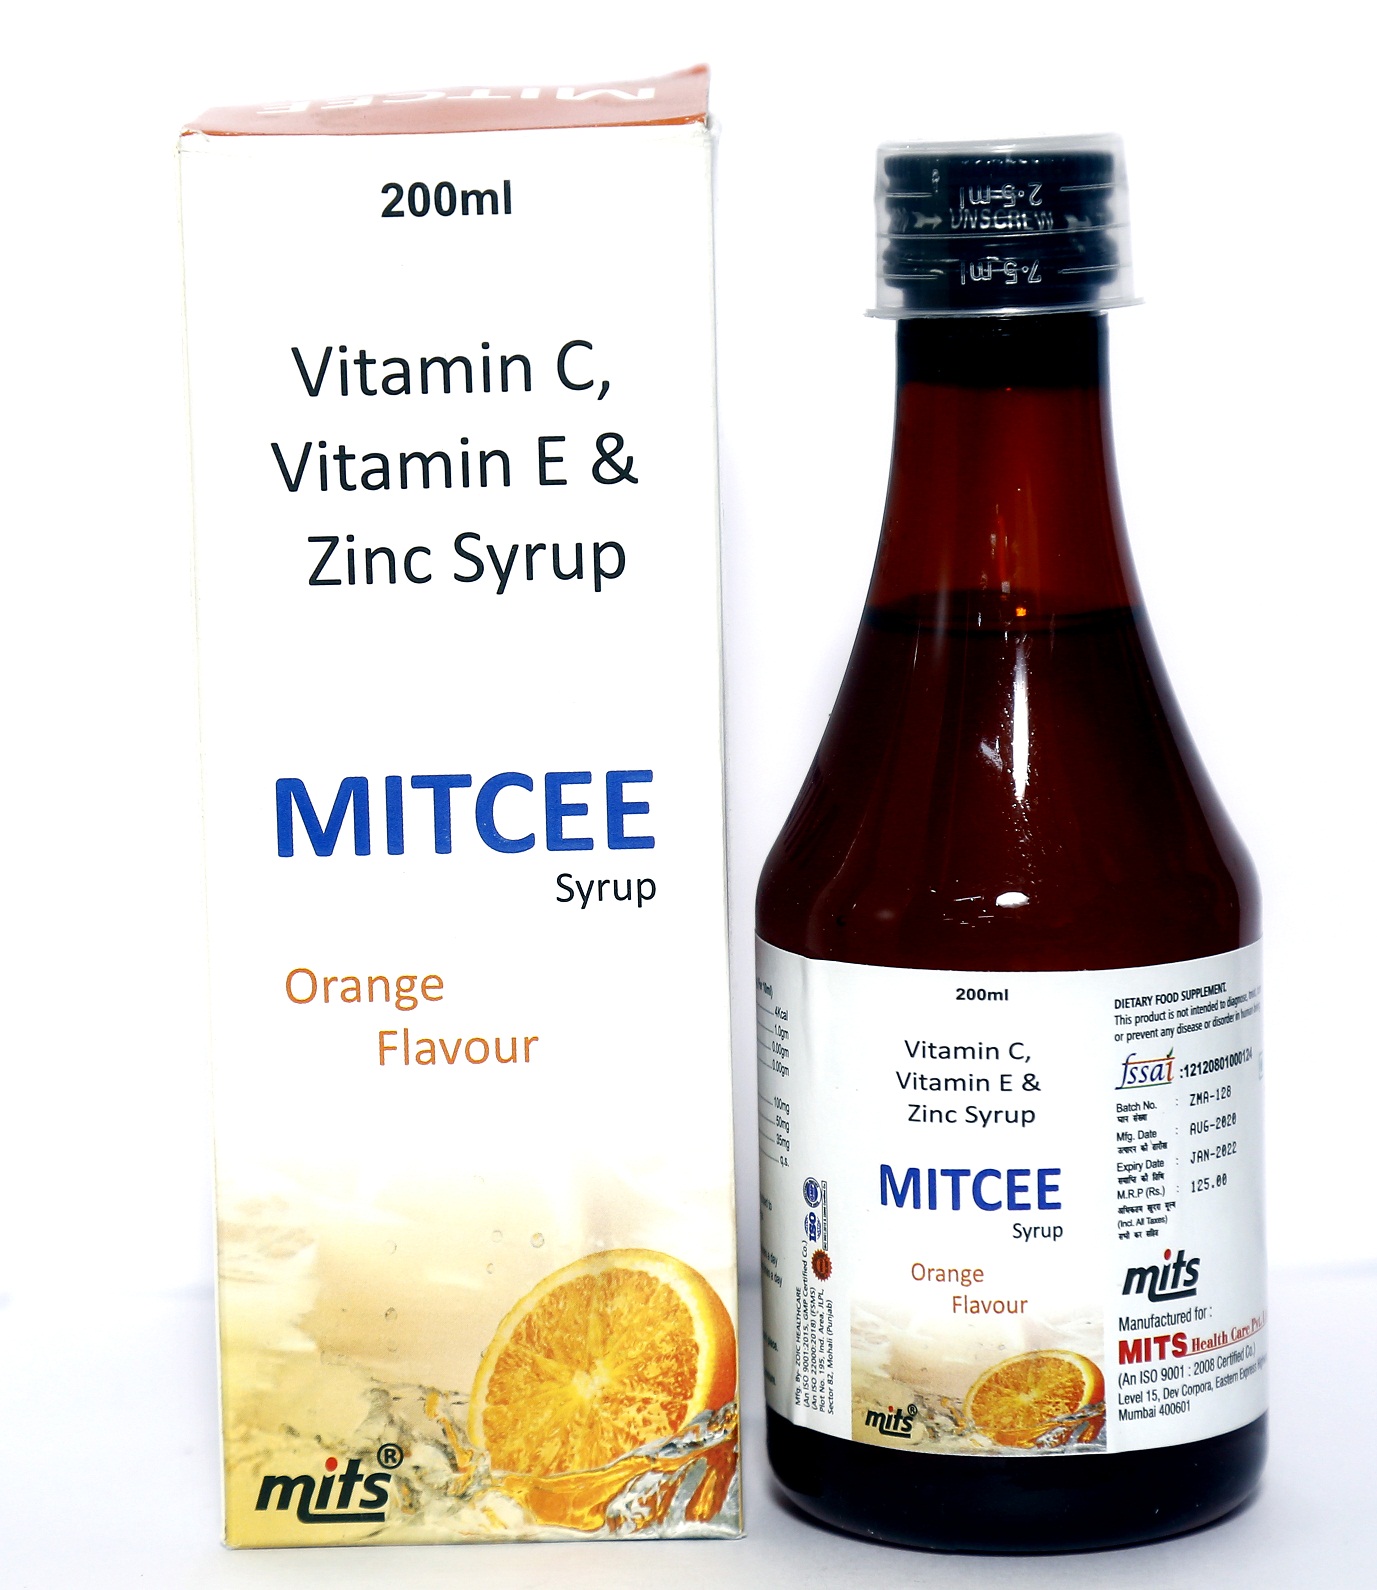 MITCEE Syrup